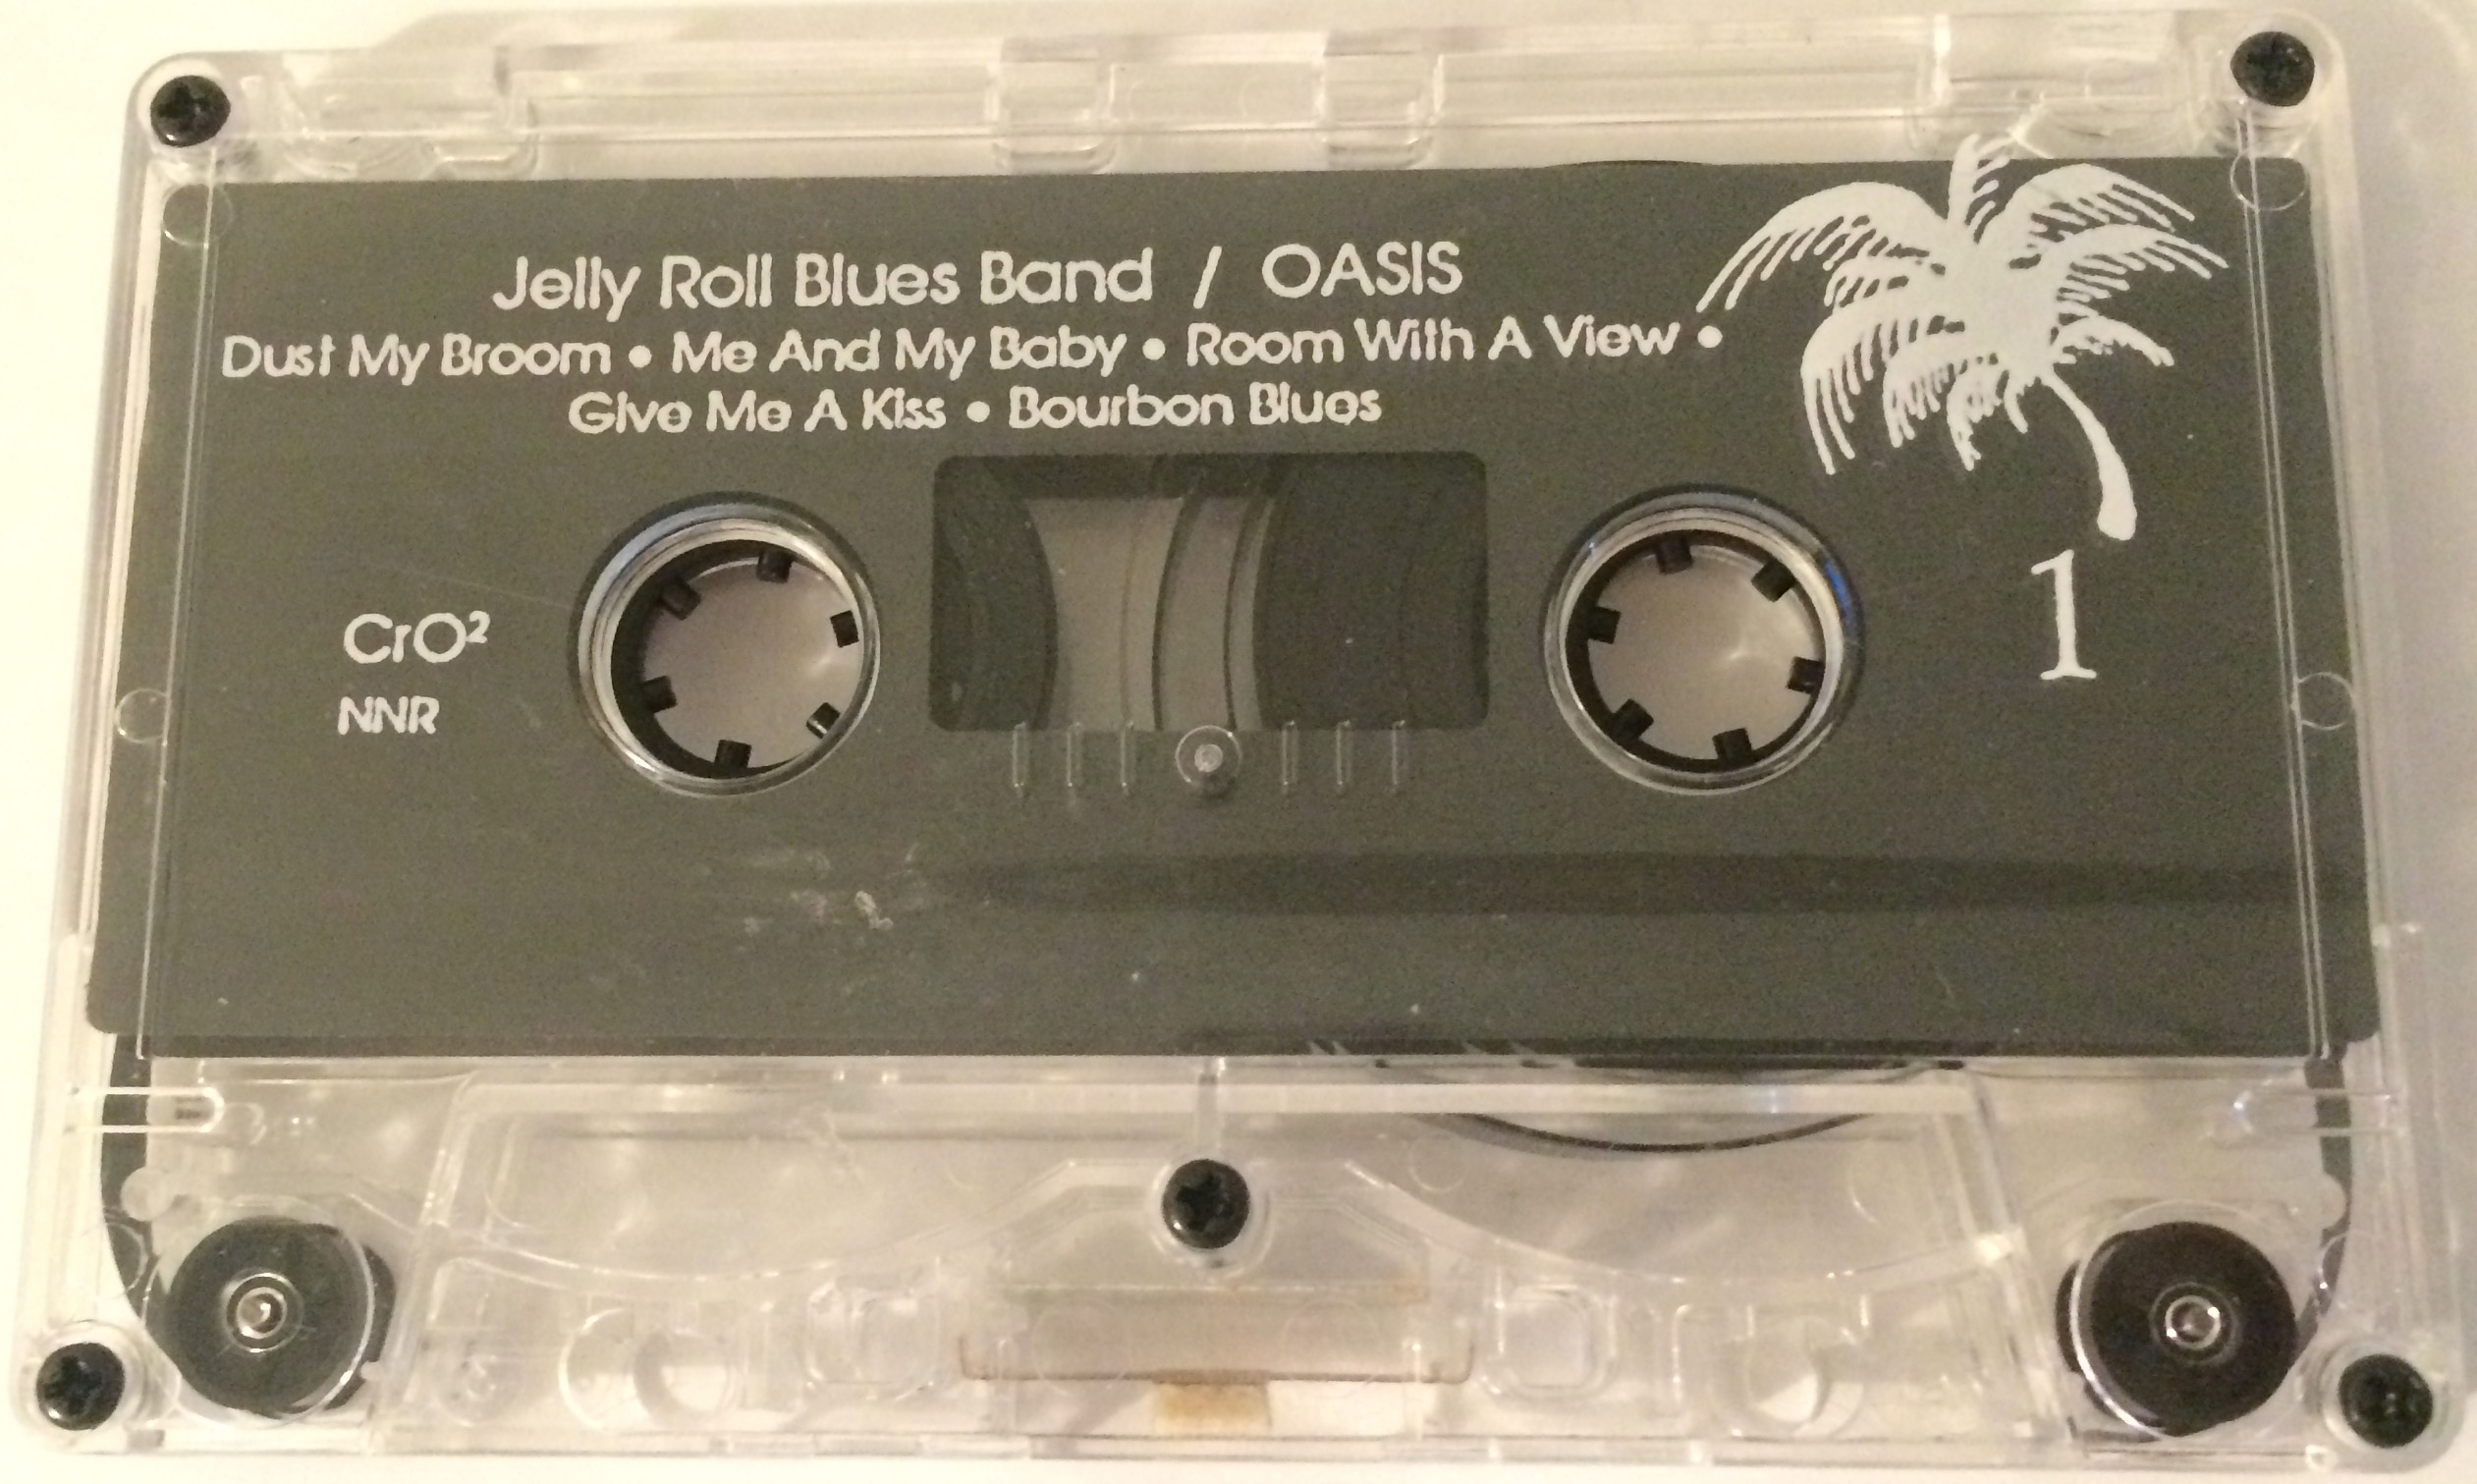 Jelly Roll Blues Band | Oasis